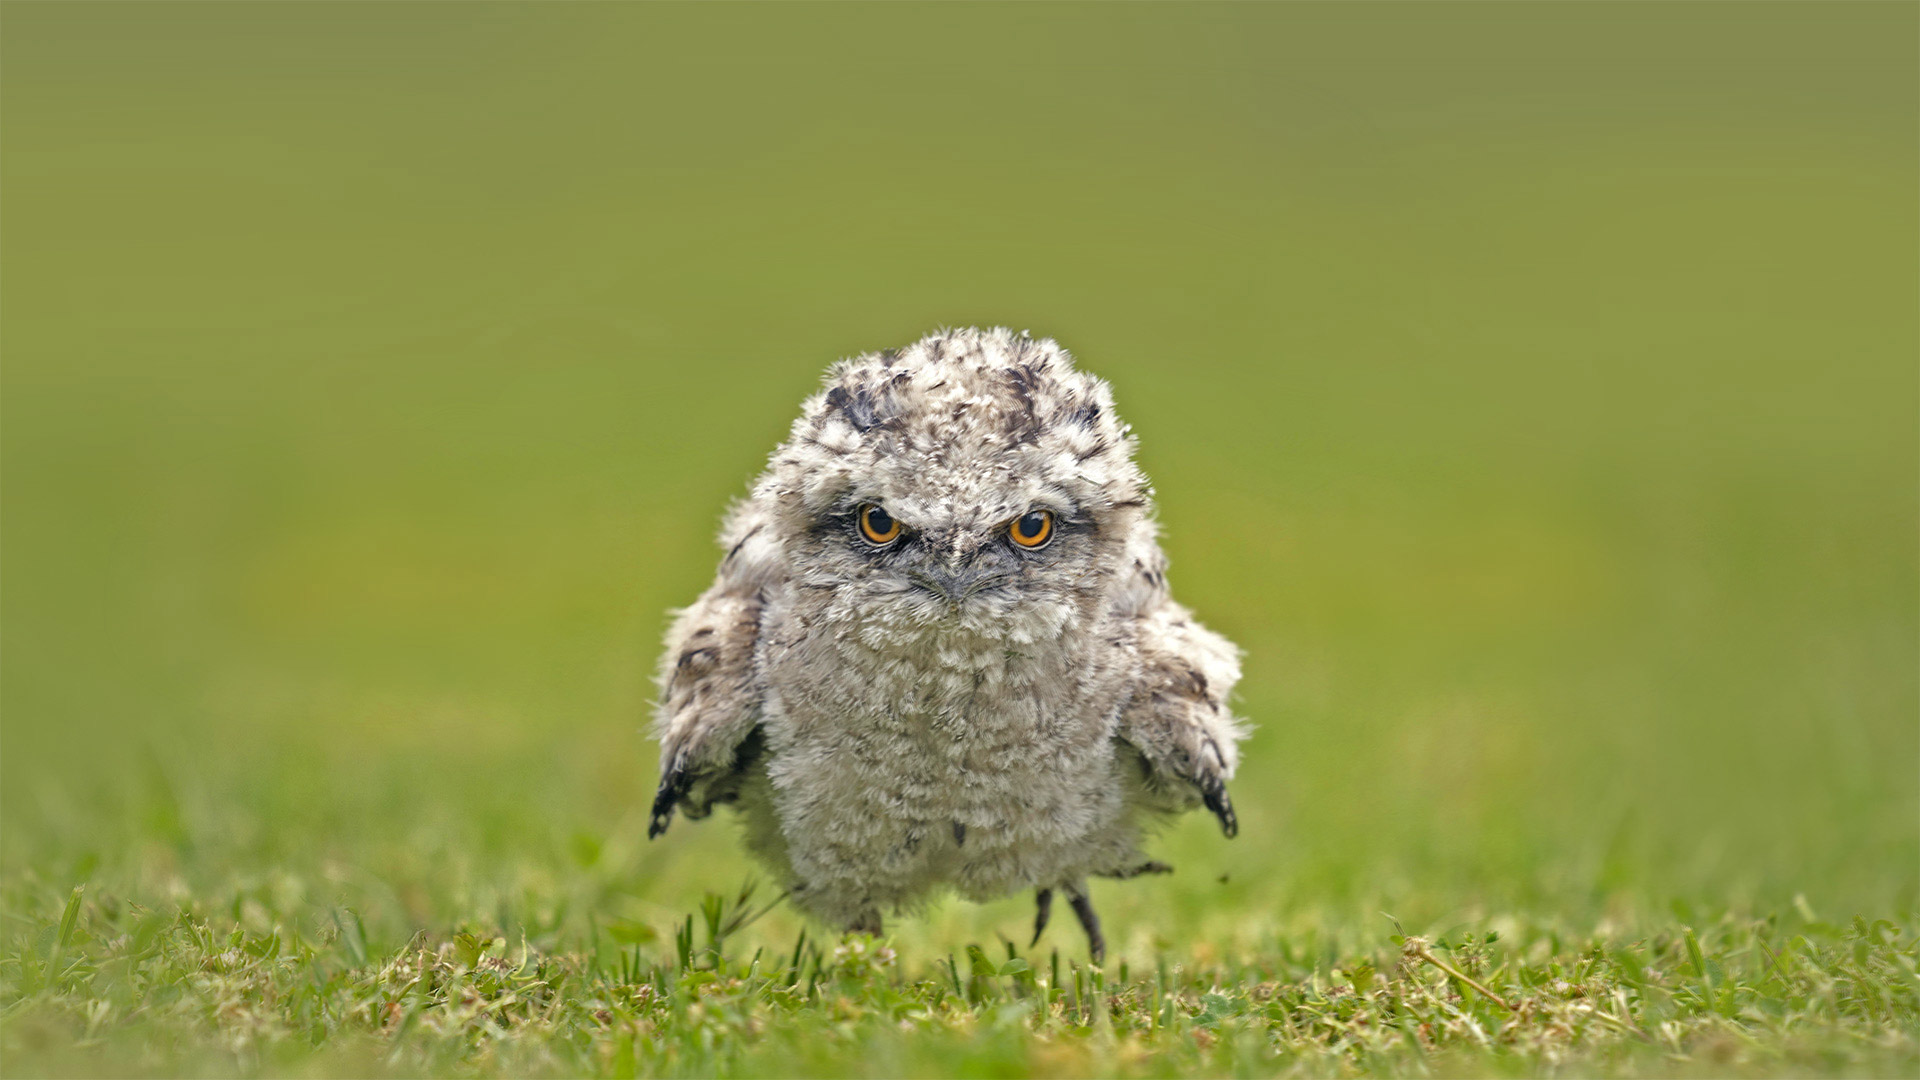 Tawny frogmouth chick, Australia - SnapRapid/Offset by Shutterstock)